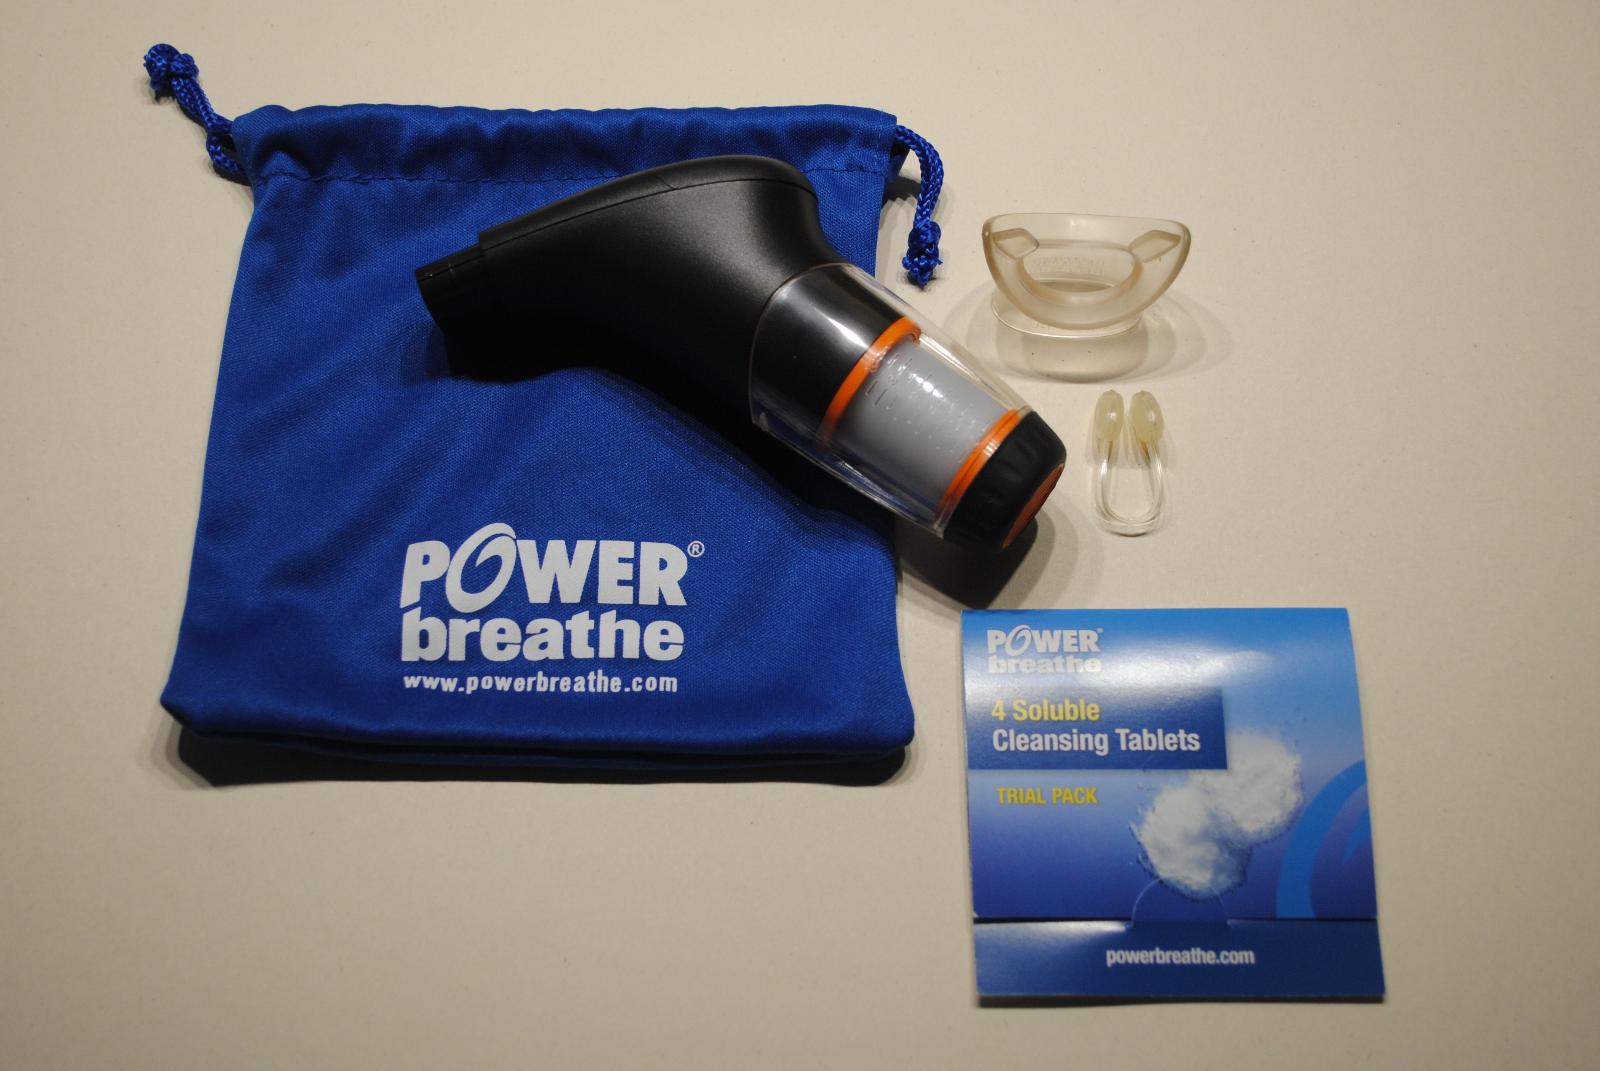 POWERbreathe Cleansing Tablets